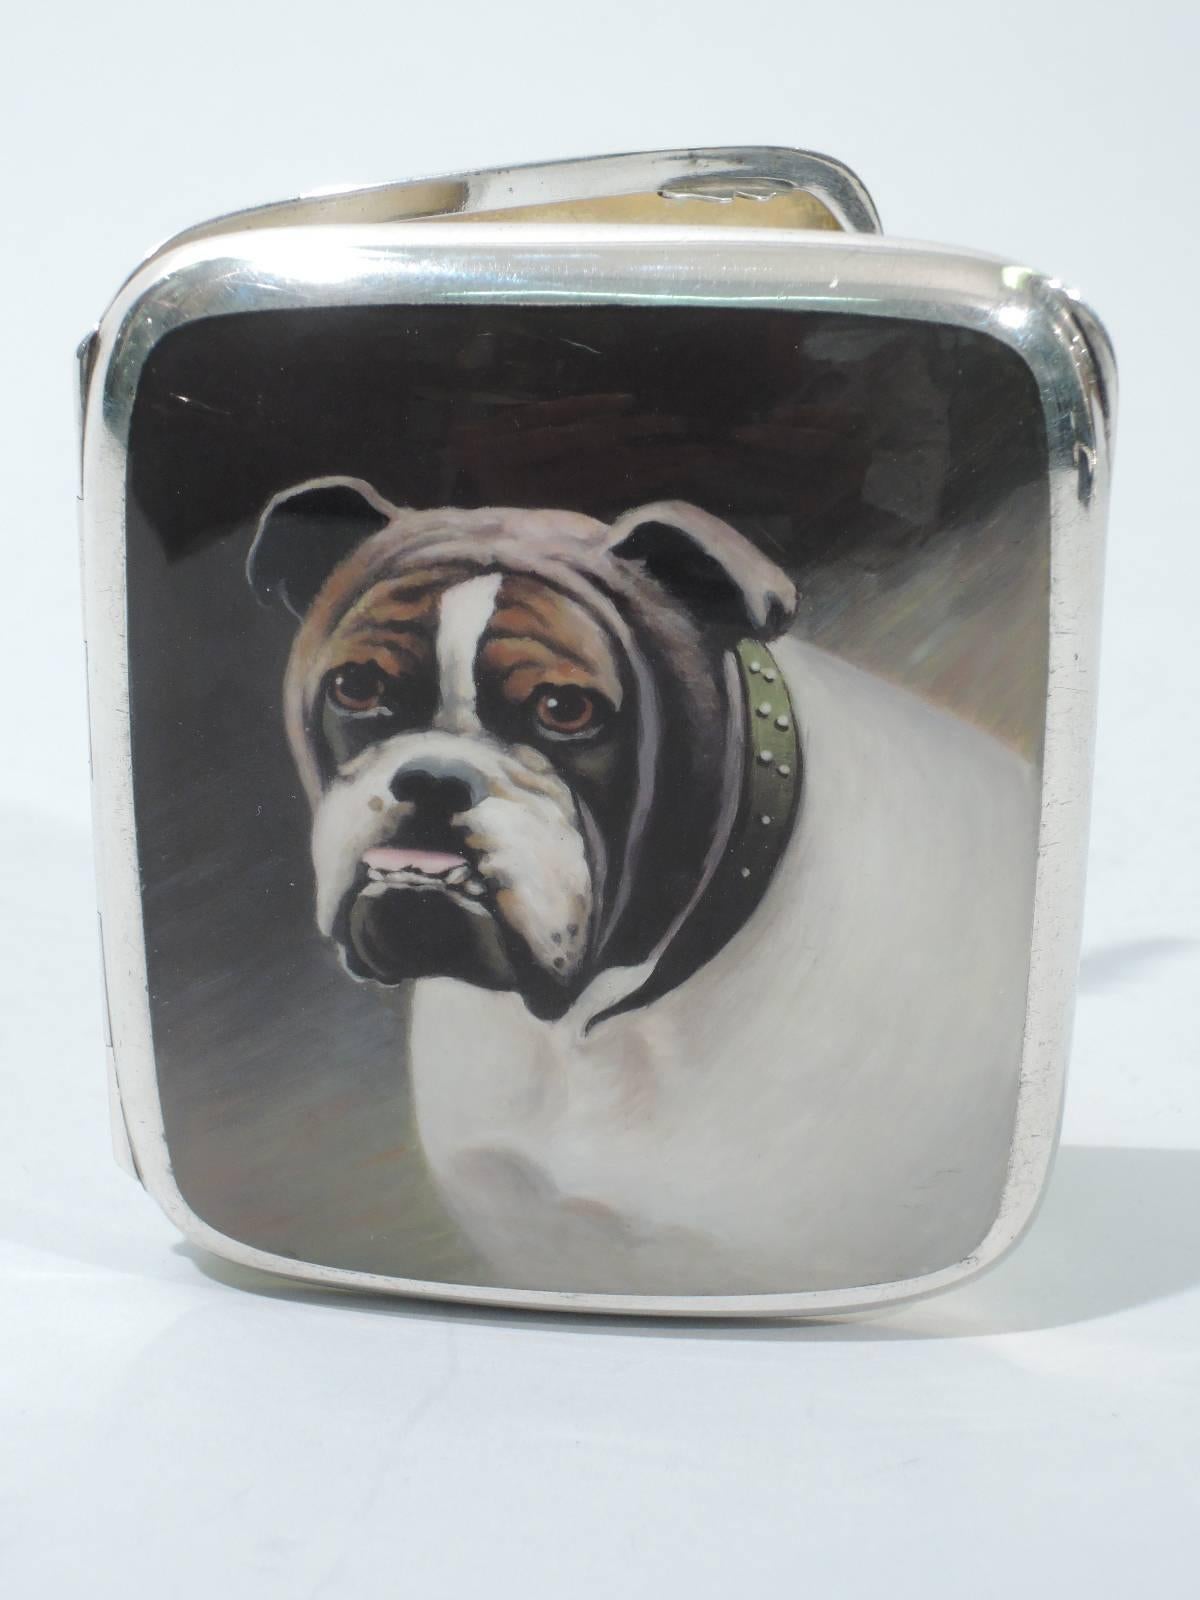 European cigarette case in 900 silver and enamel, circa 1910. Rectangular with curved corners and hinged cover. On cover is enameled bust of English bulldog: sagging jowls, pink tongue, and anxious brown eyes. Around neck is studded green collar.